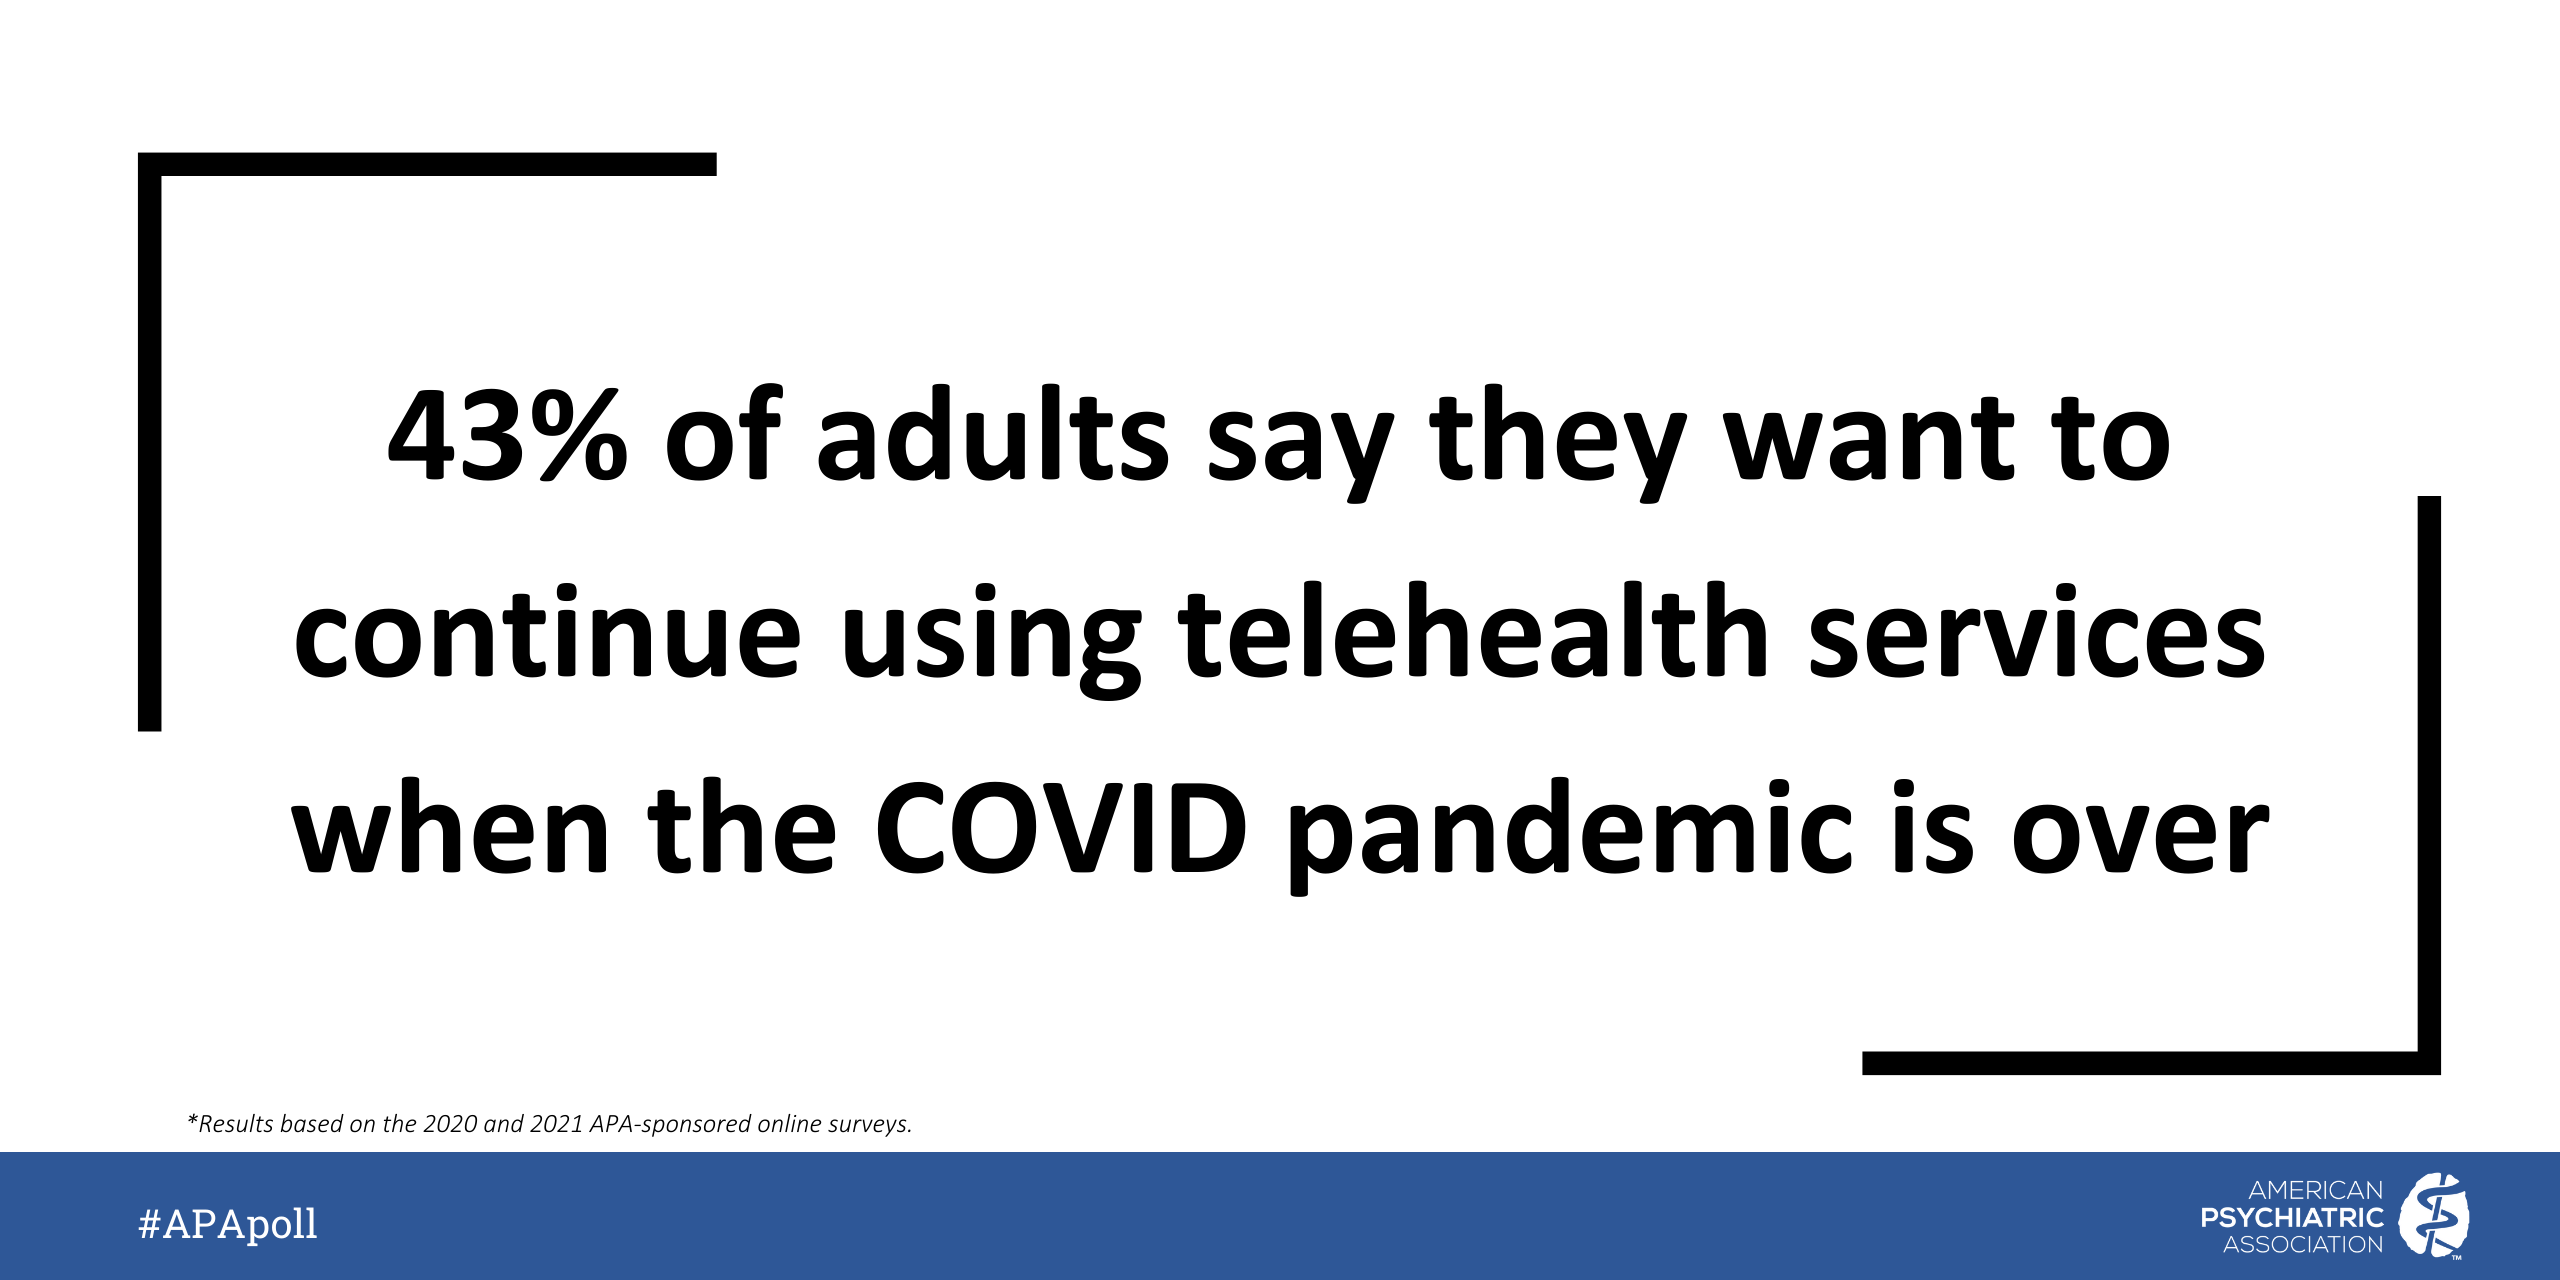 43% of adults say they want to continue using telehealth services when the COVID pandemic is over